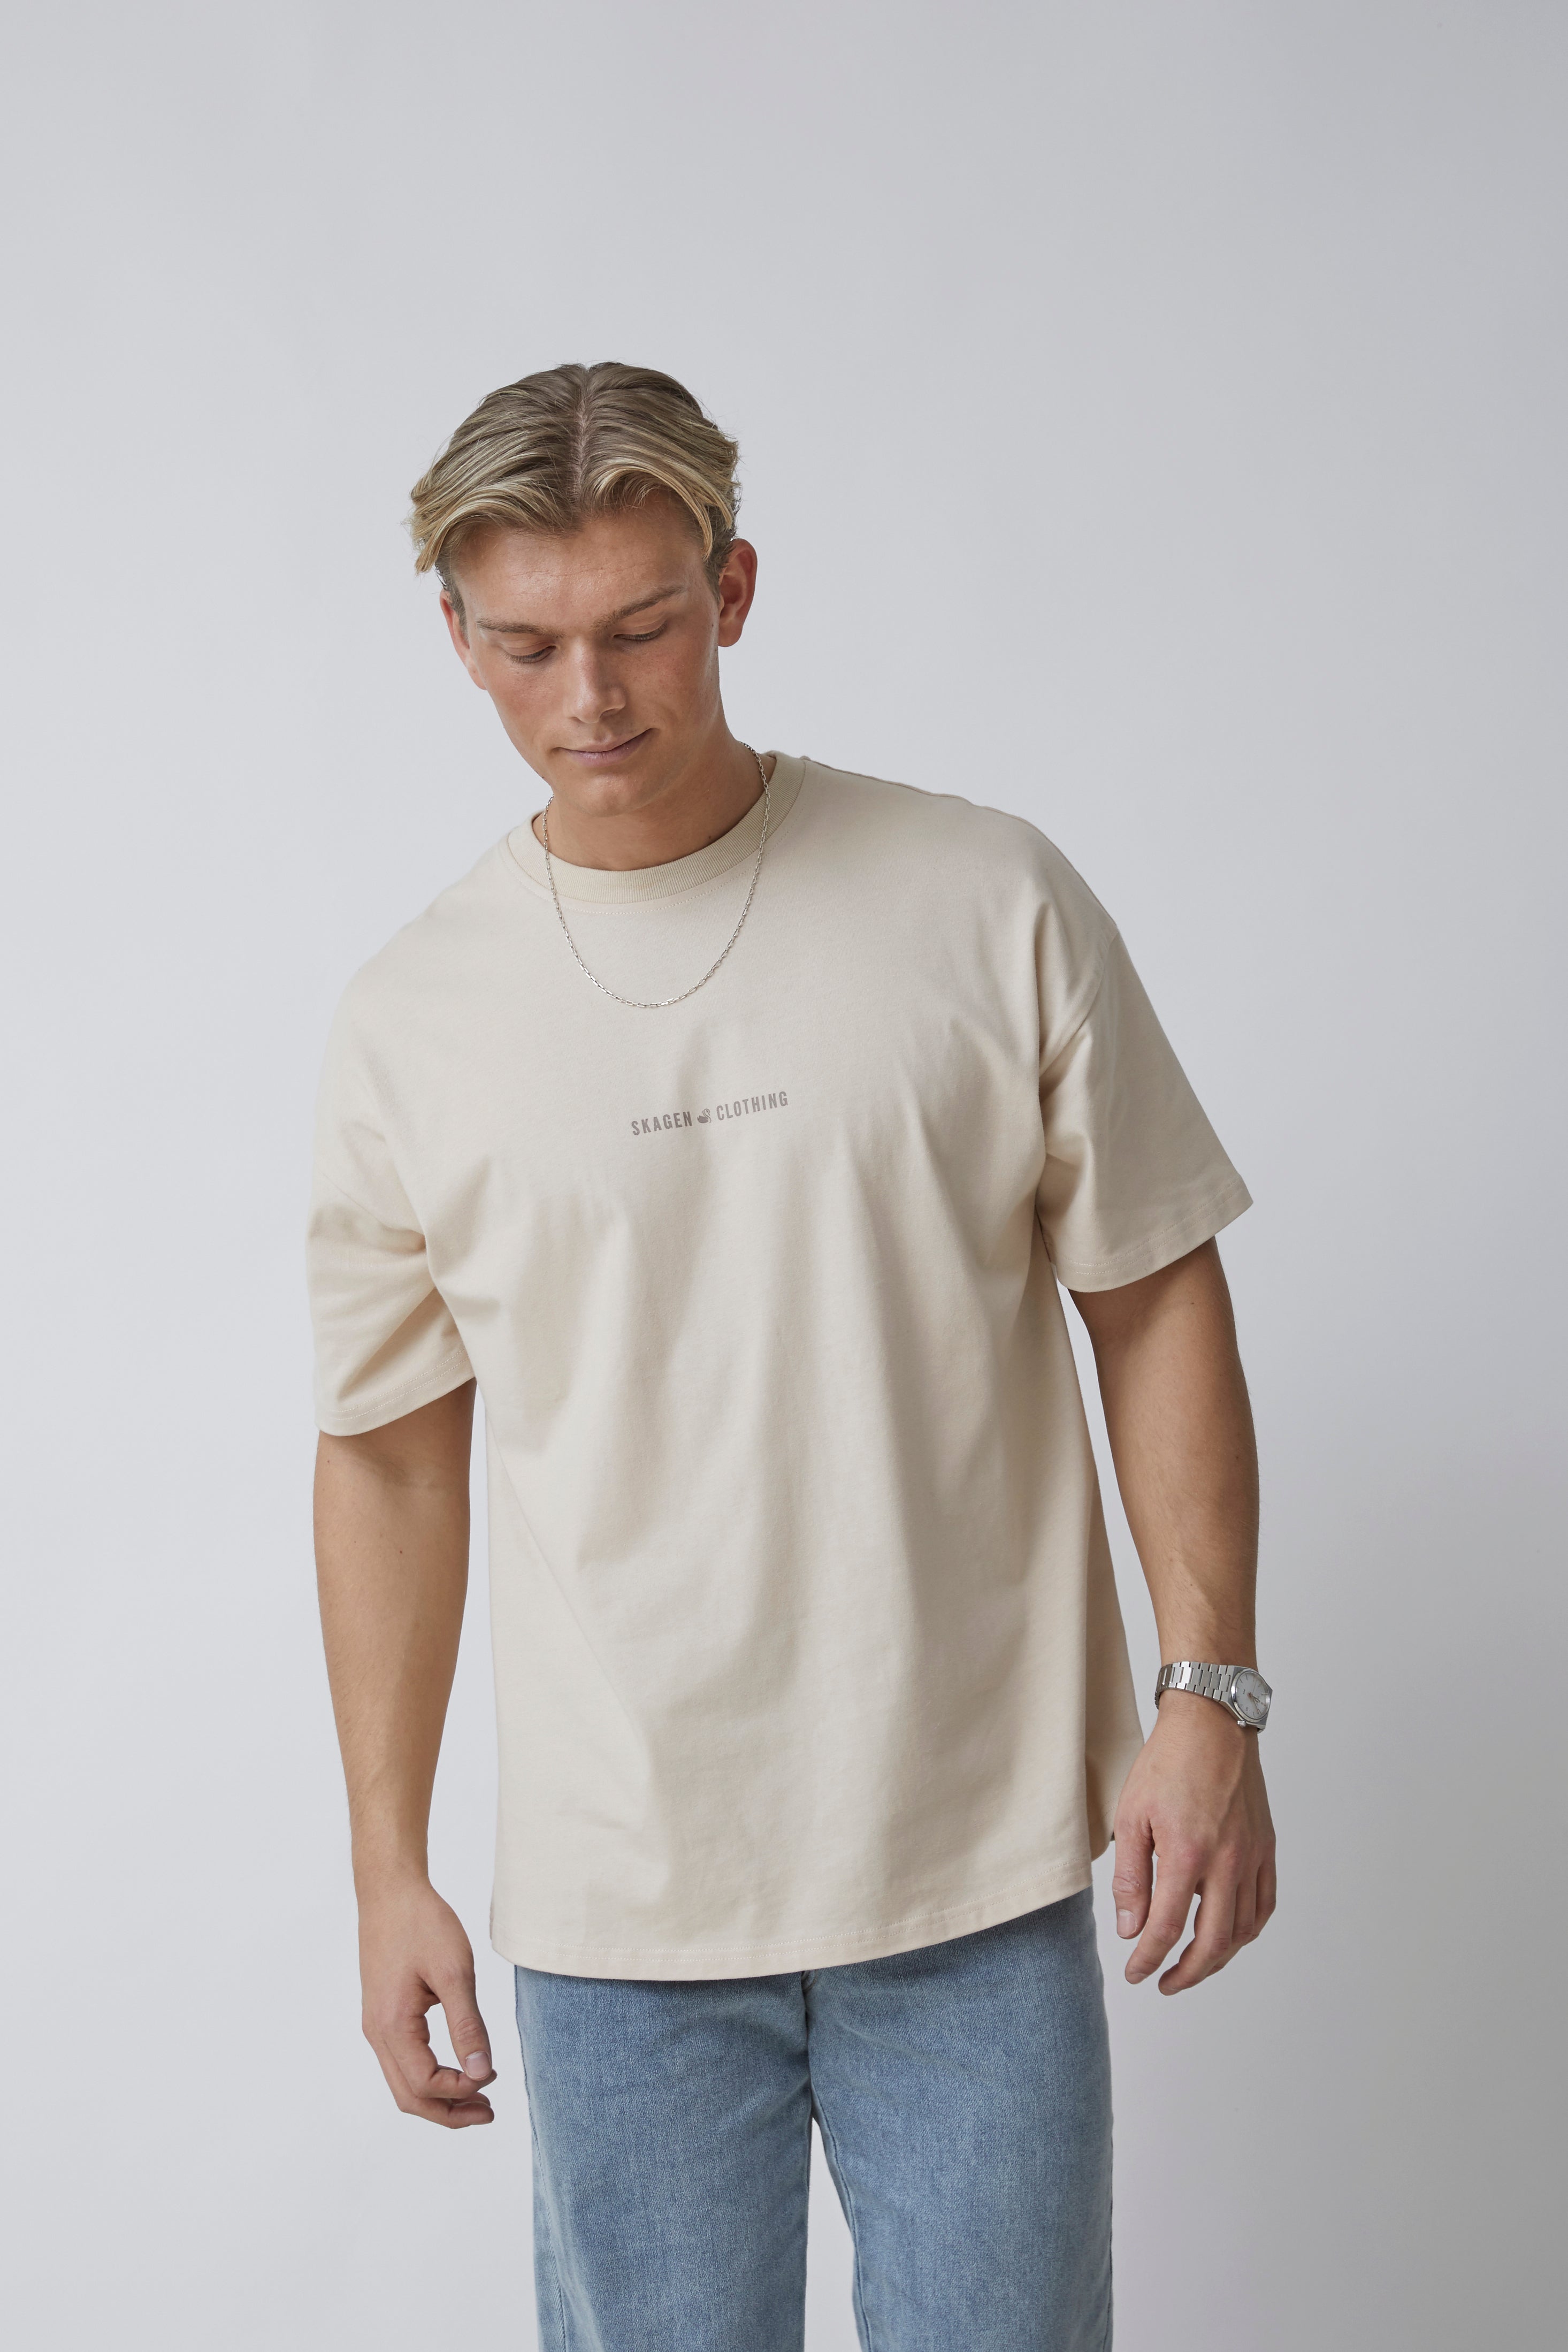 T-SHIRT - POWERED BY SWAN (BEIGE)